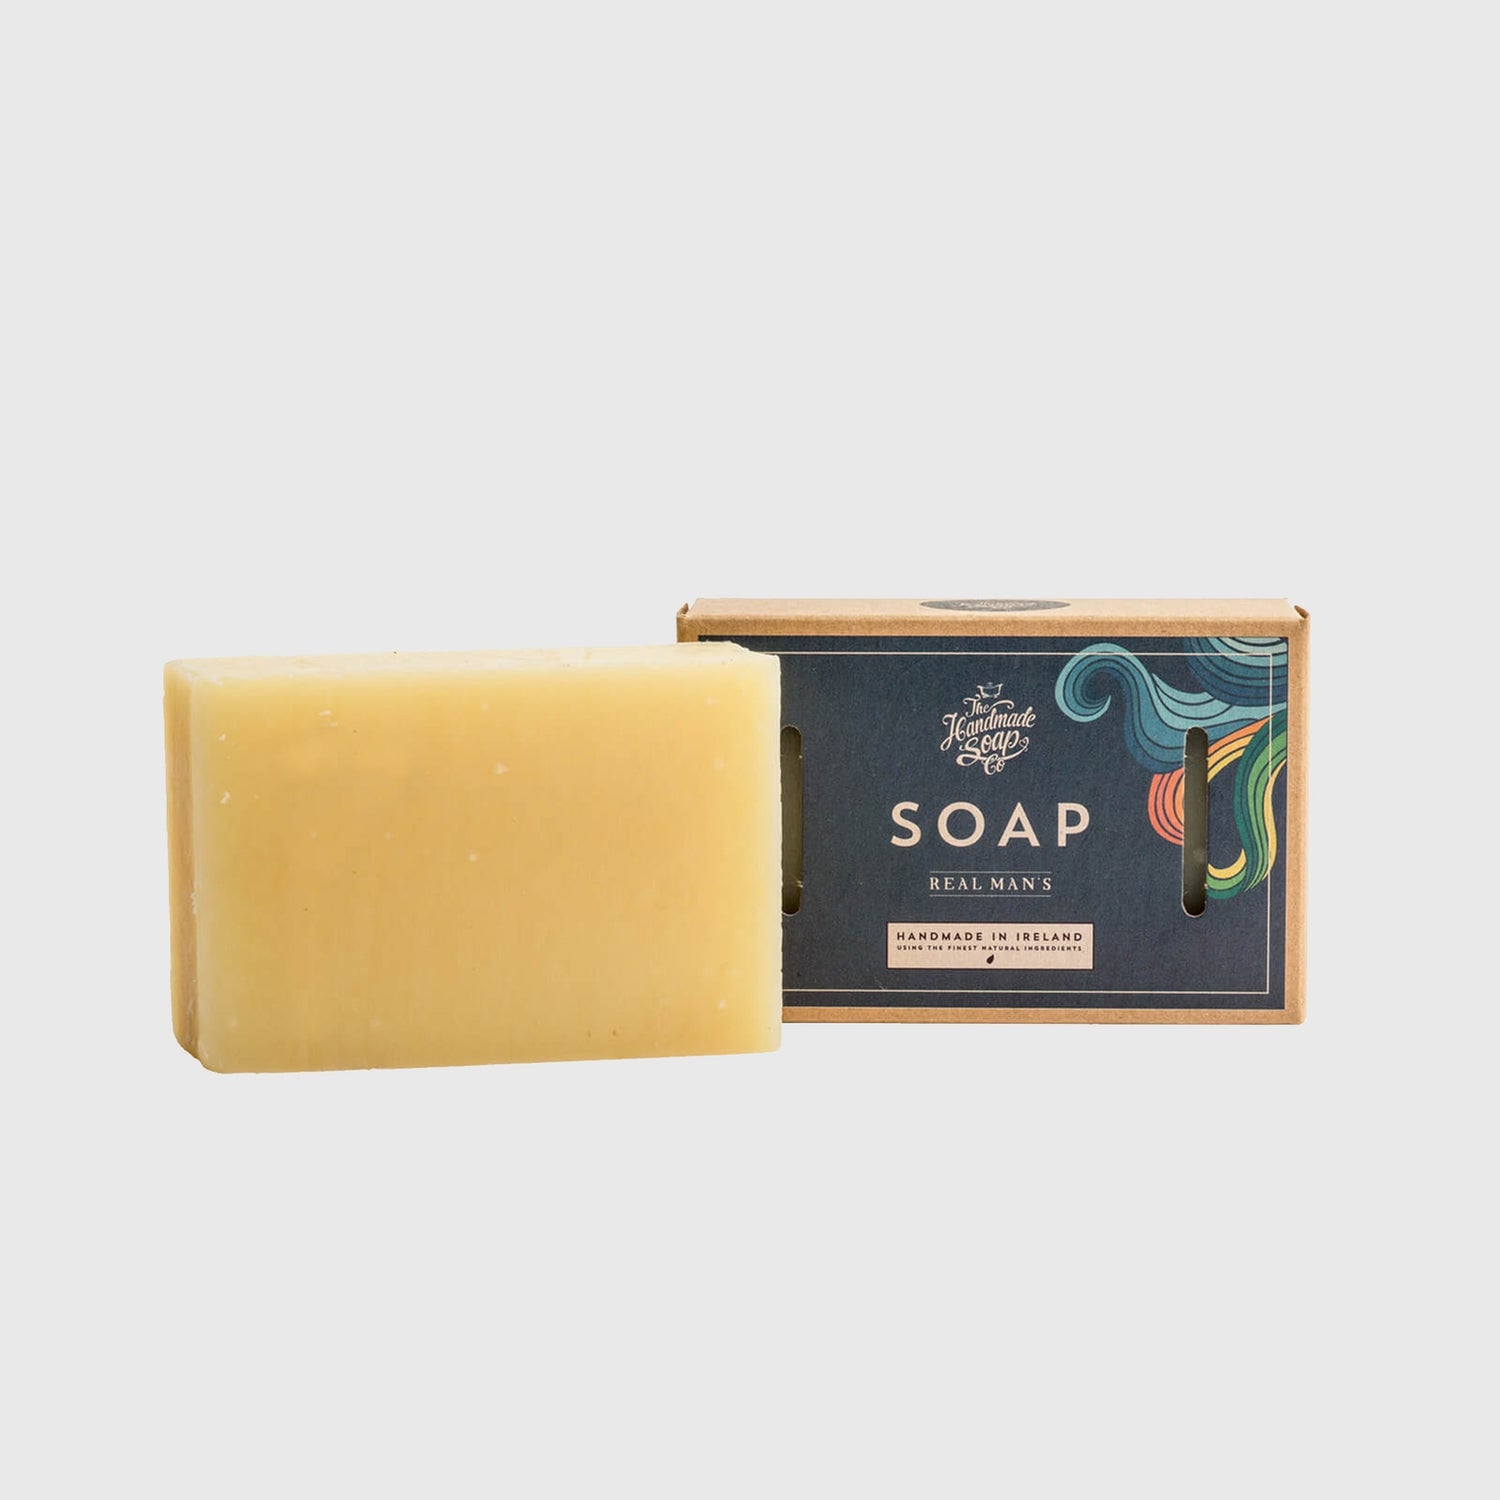 All Things Herbal Limited - Handcrafted Natural Soap - handcrafted natural  soaps - Man Bars, Mens Soap Collection- Quality Skincare for Men